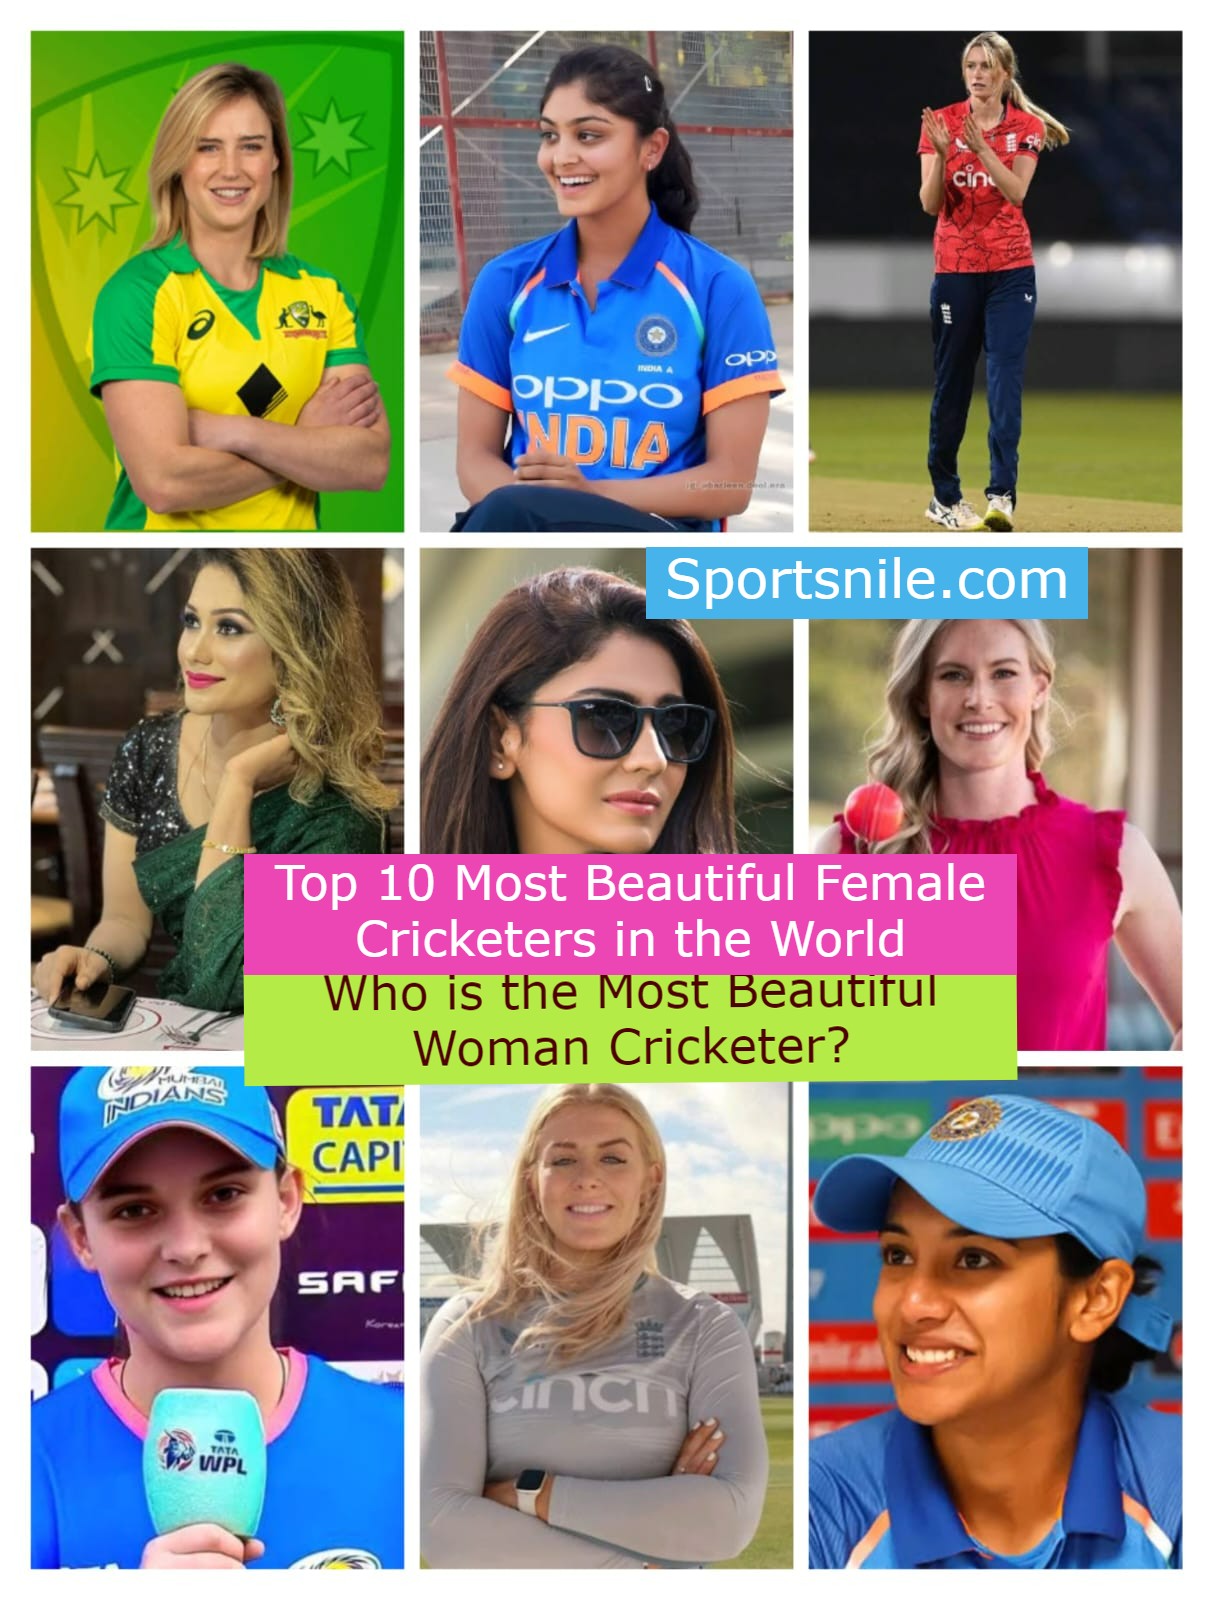 Top 10 Most Beautiful Female Cricketers